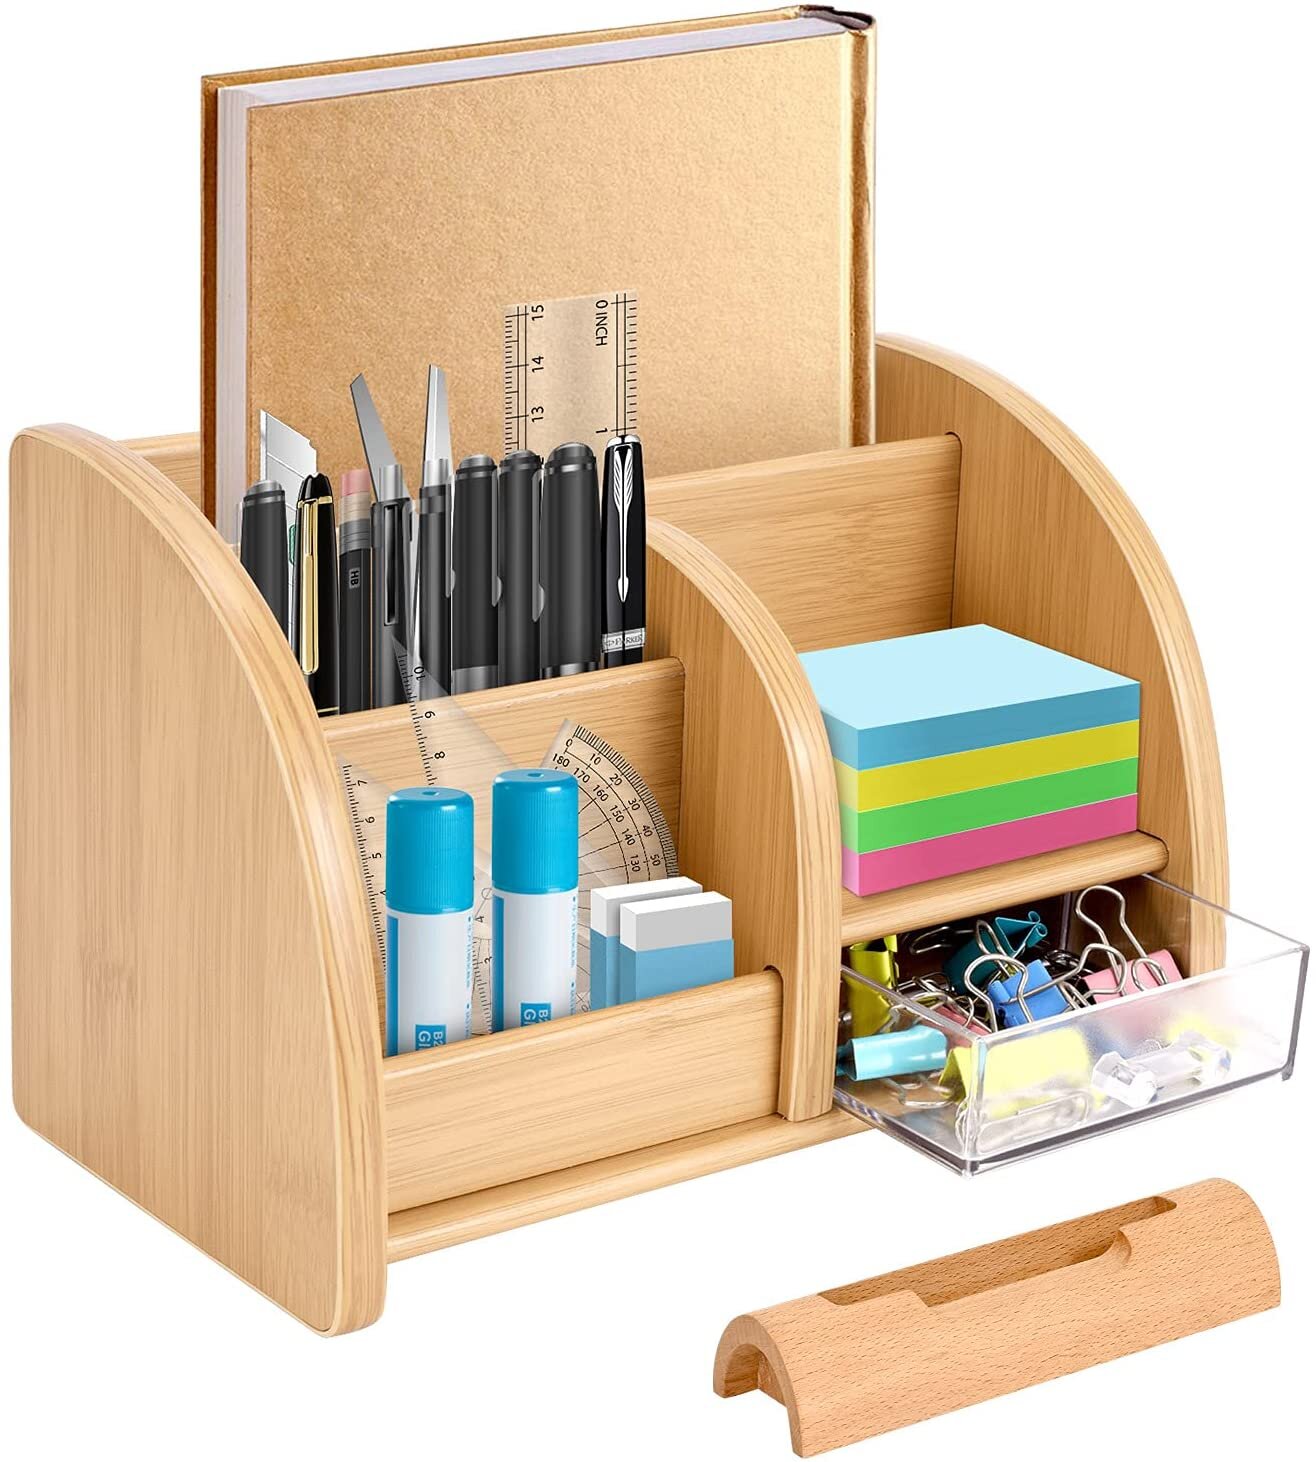 Wooden Bamboo Pen Holder Organizer Pencil Storage with 3 Compartment Caddy Box Rack Cards for Office Home School Supplies & Desktop Accessories 